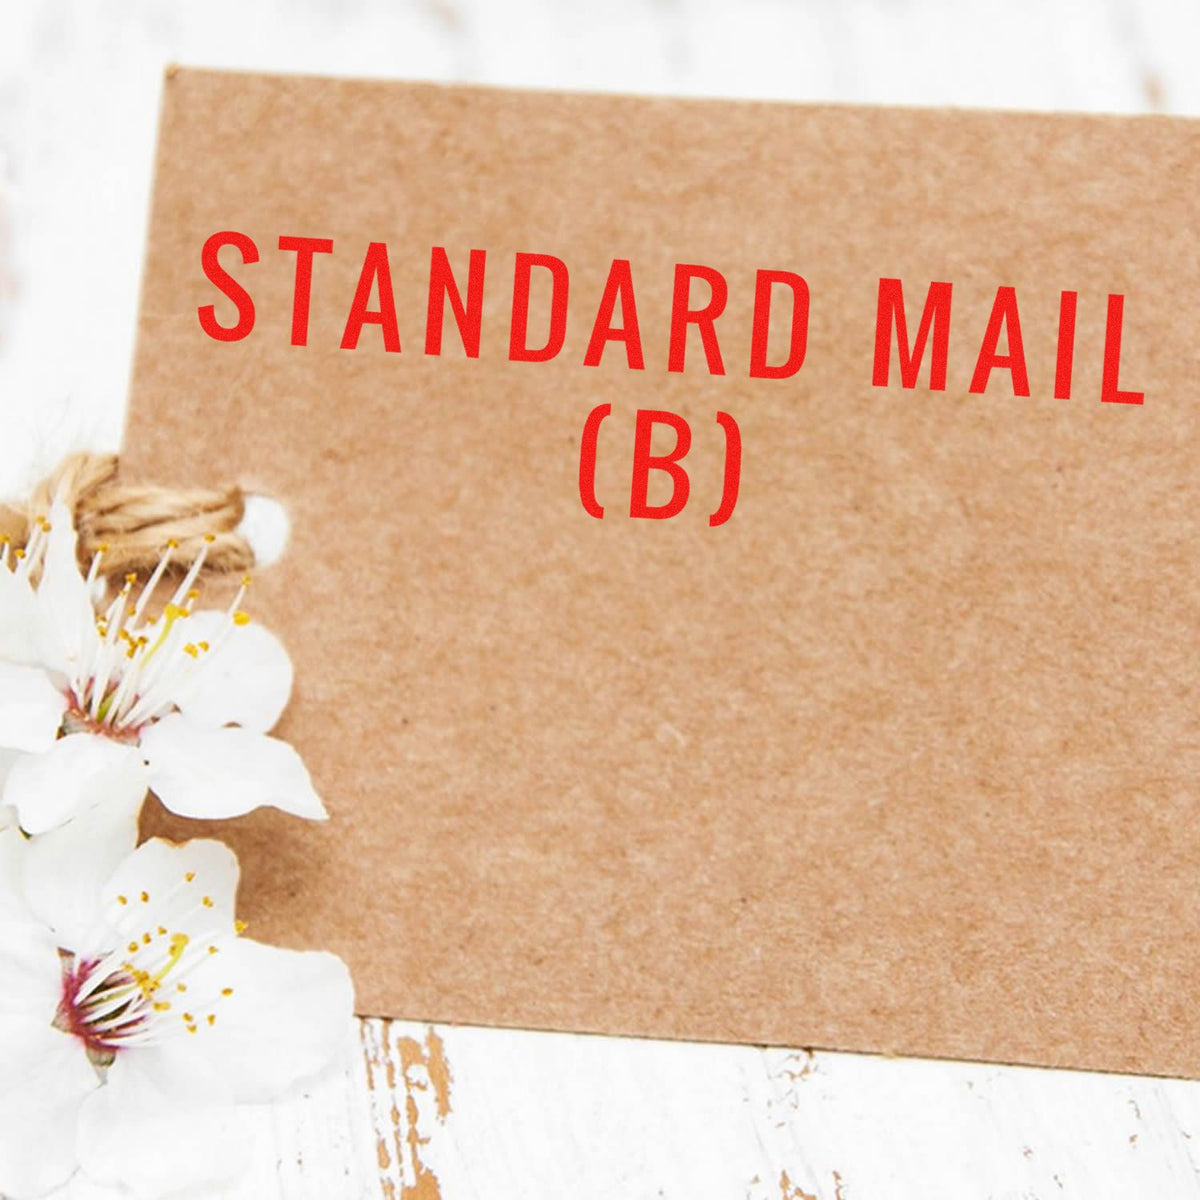 Self-Inking Standard Mail (B) Stamp In Use Photo